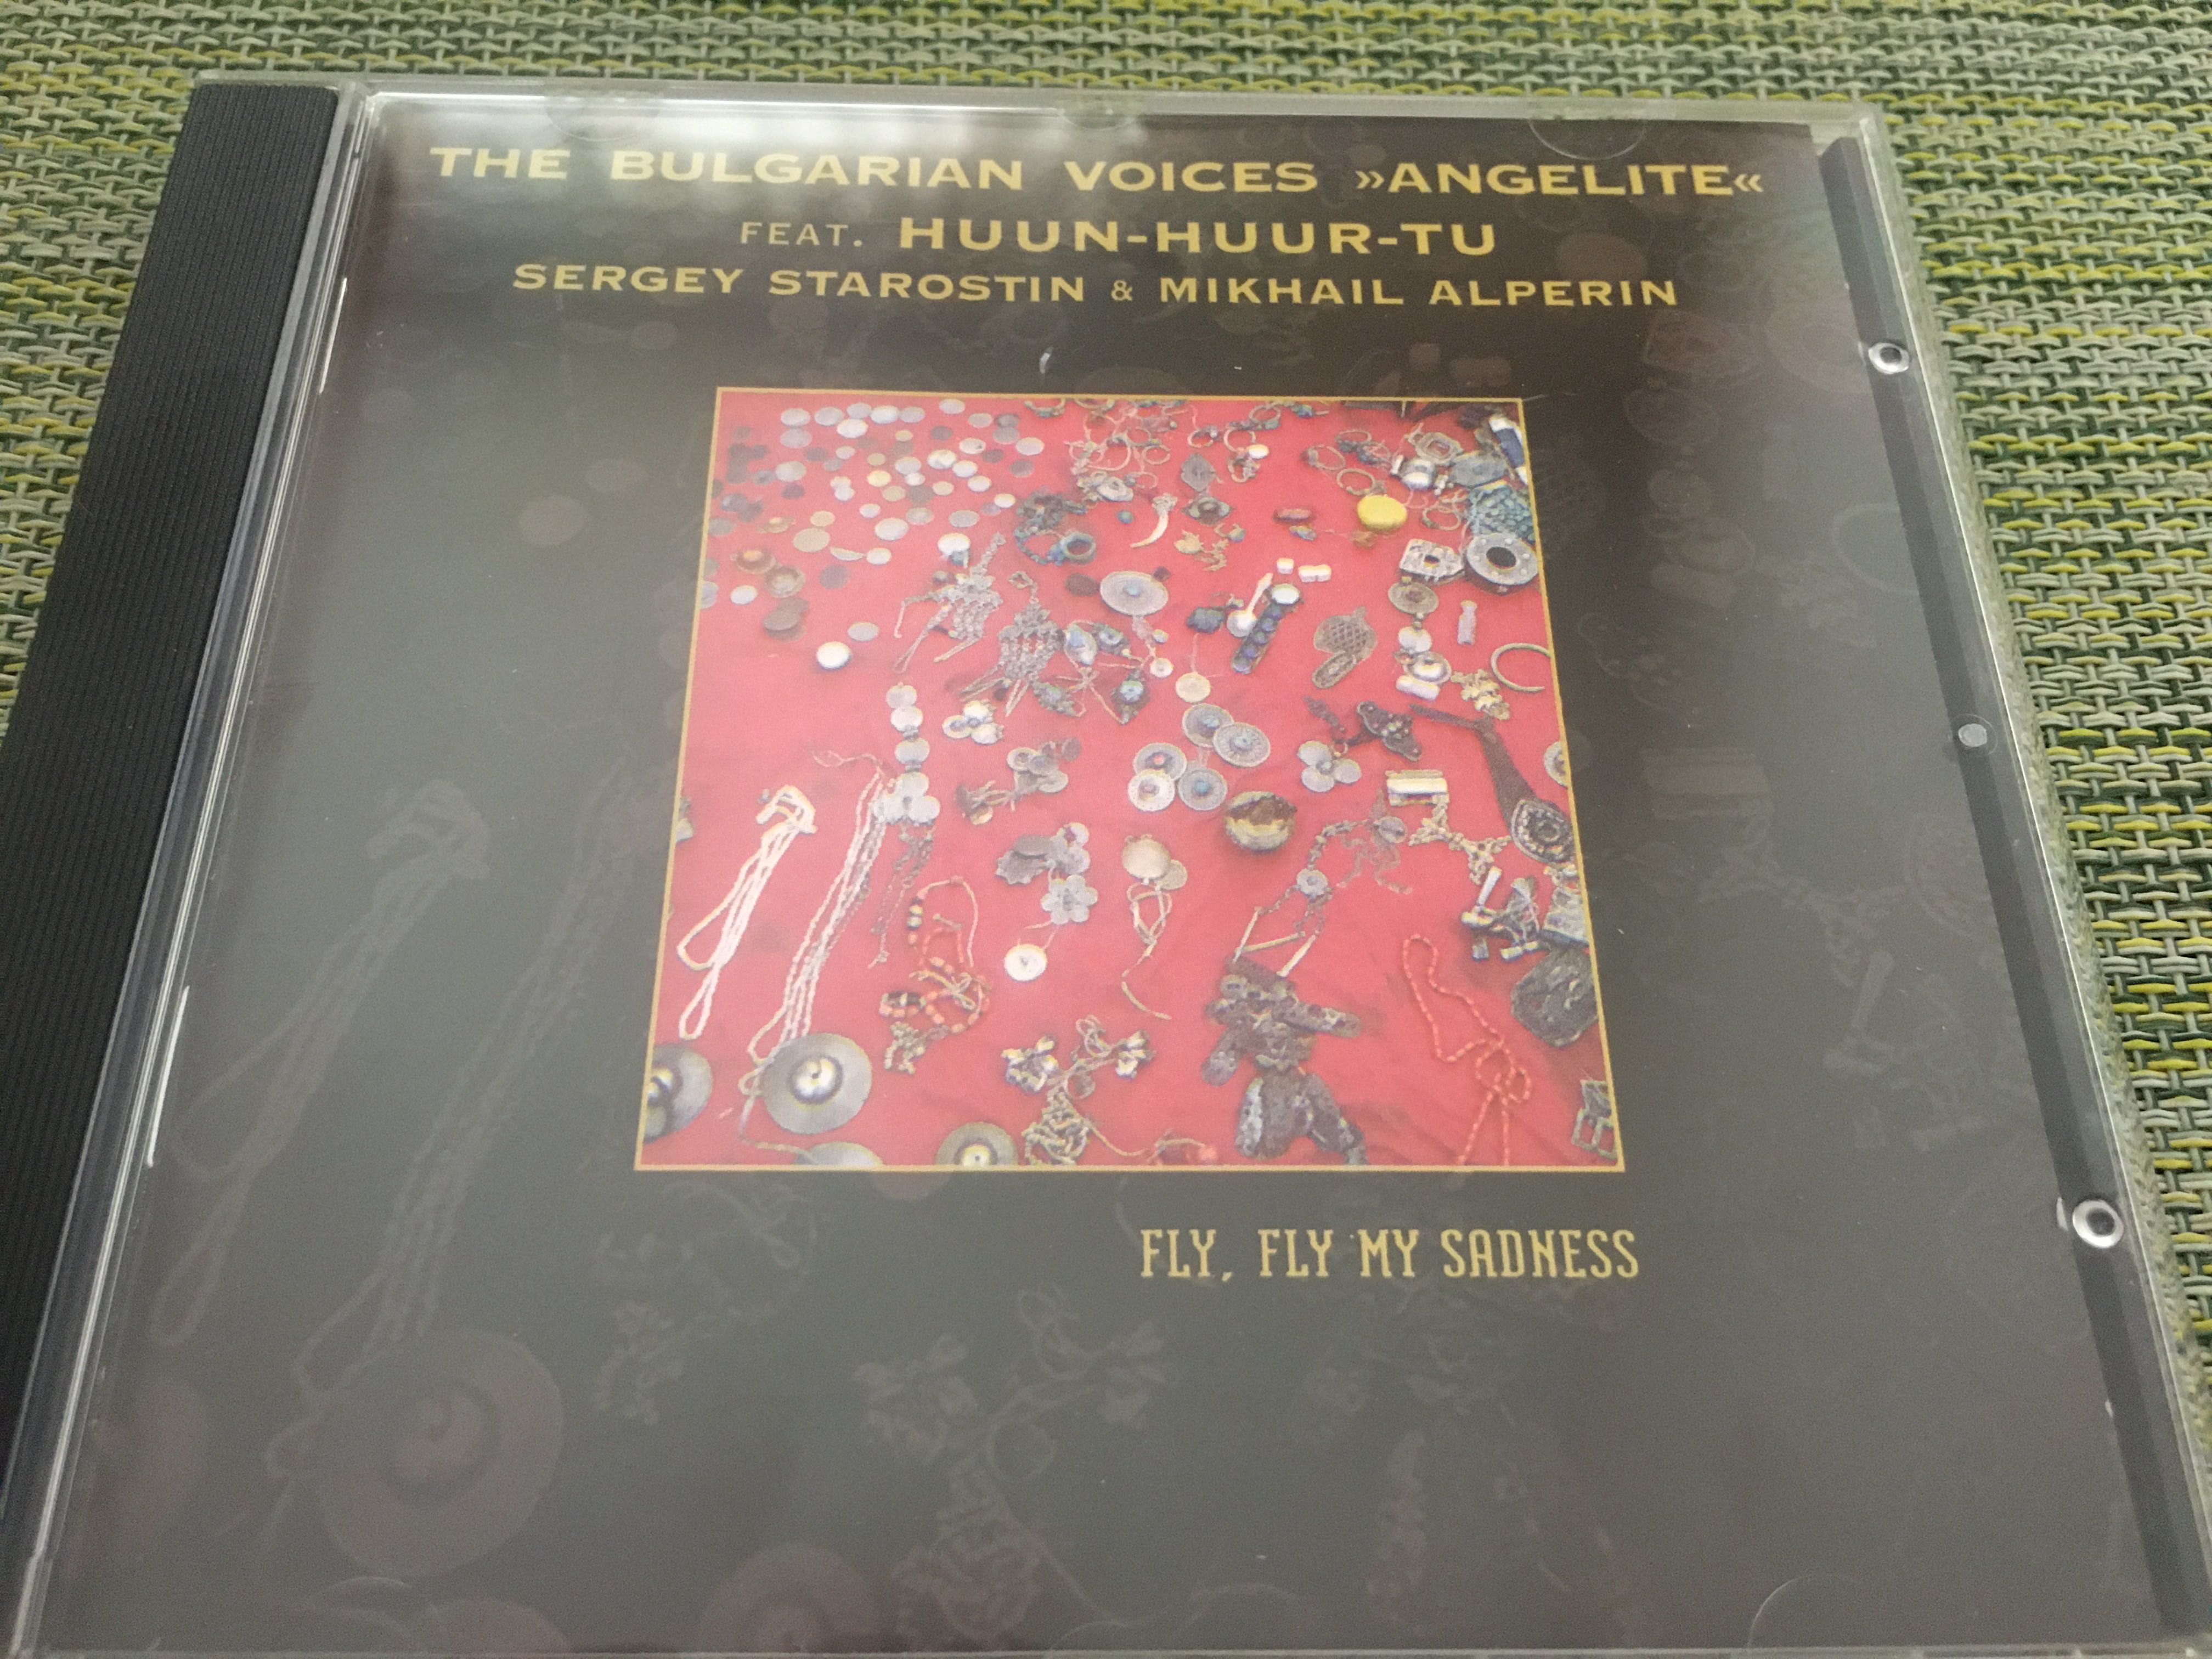 The Bulgarian Voices Angelite Fly Fly My Sadness  CD